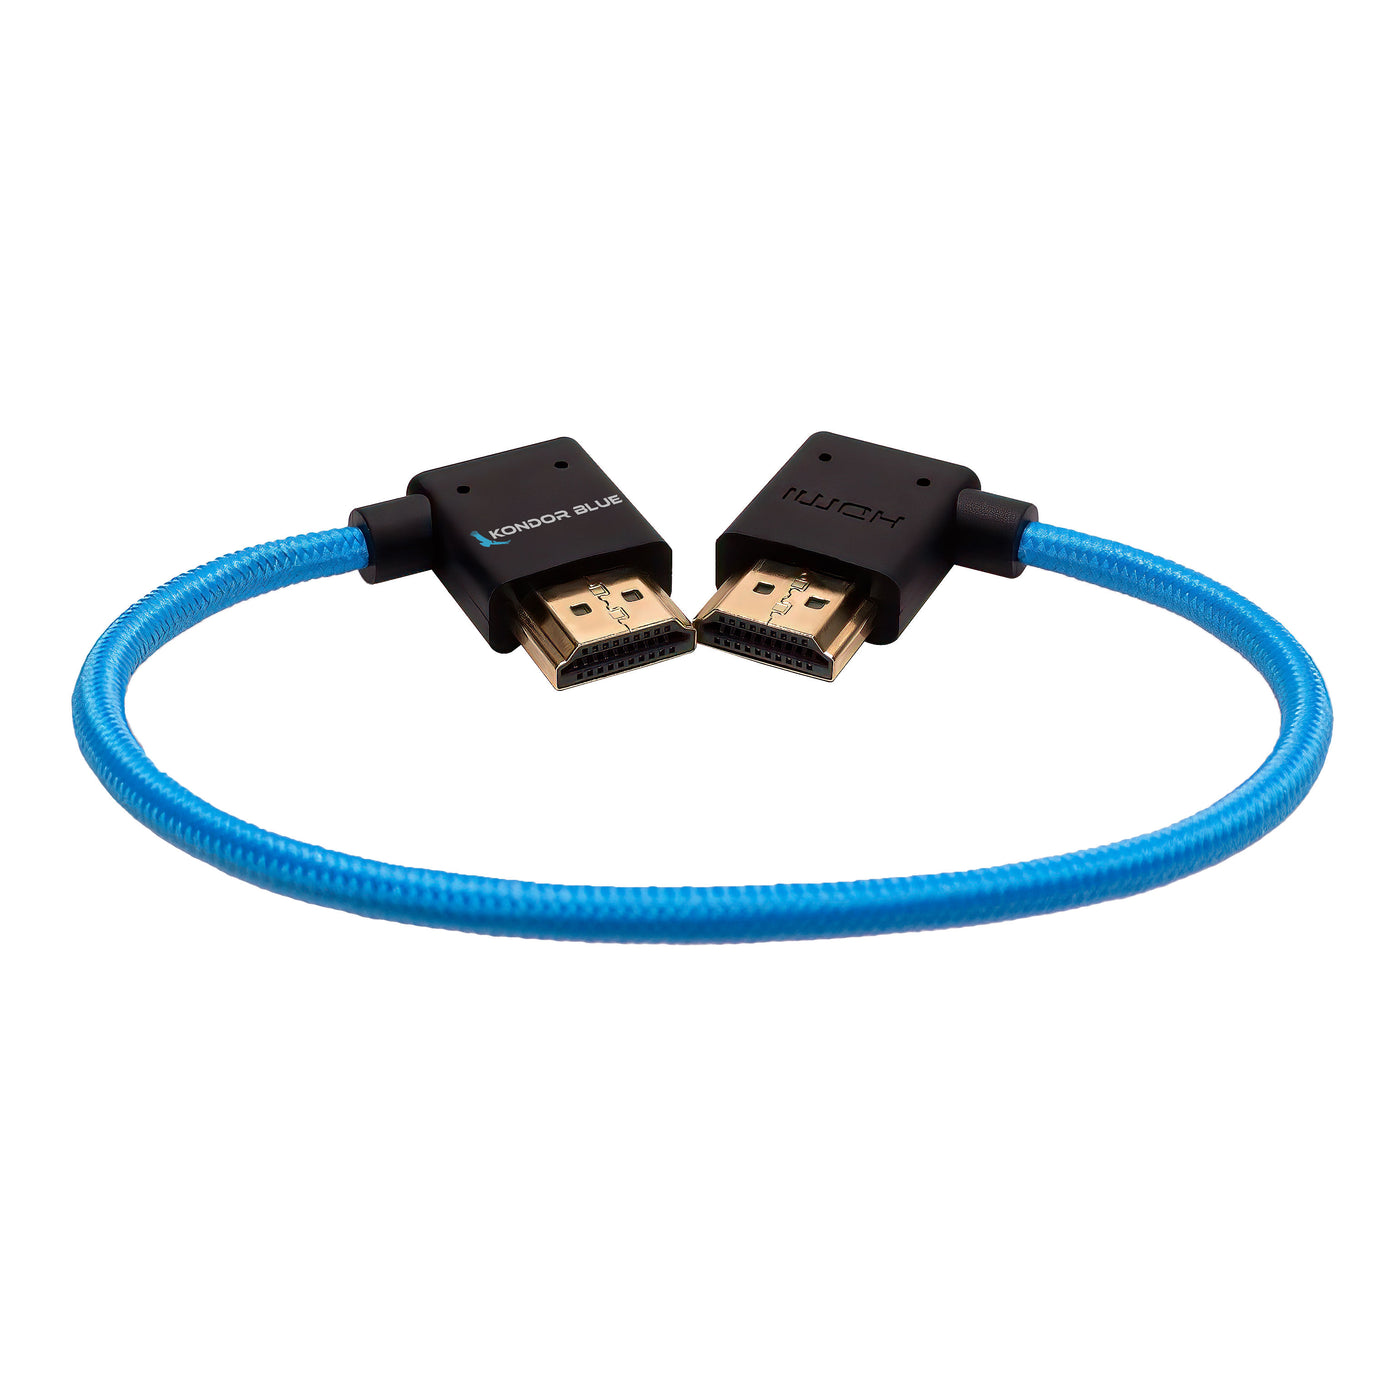 12” Right Angle to Left Angle Full HDMI Straight Cable